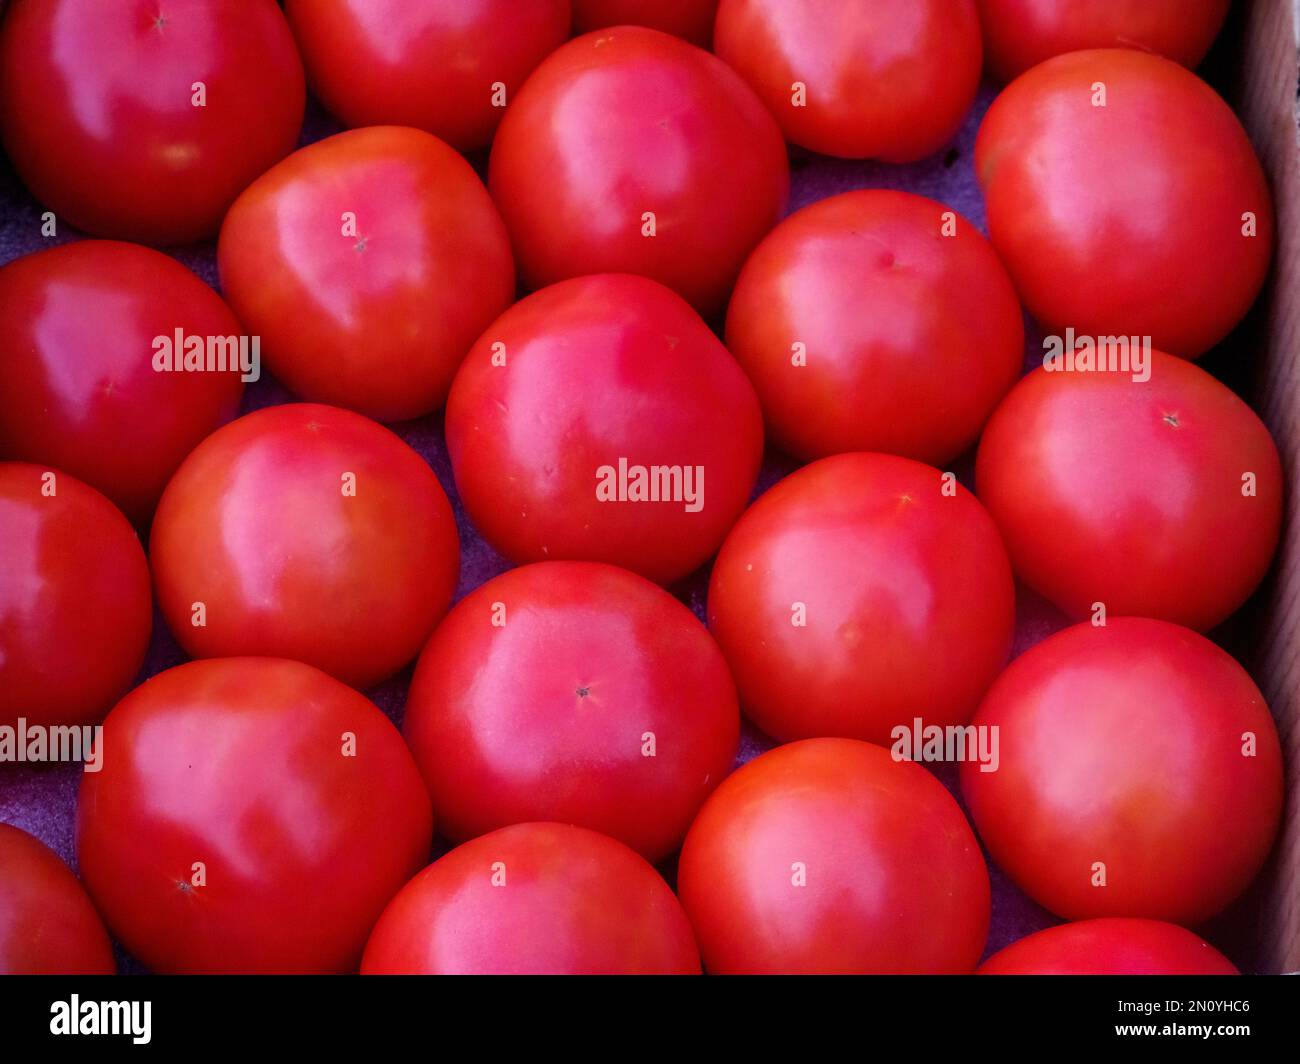 A group of bright red ripe organic fresh tomaotoes Stock Photo